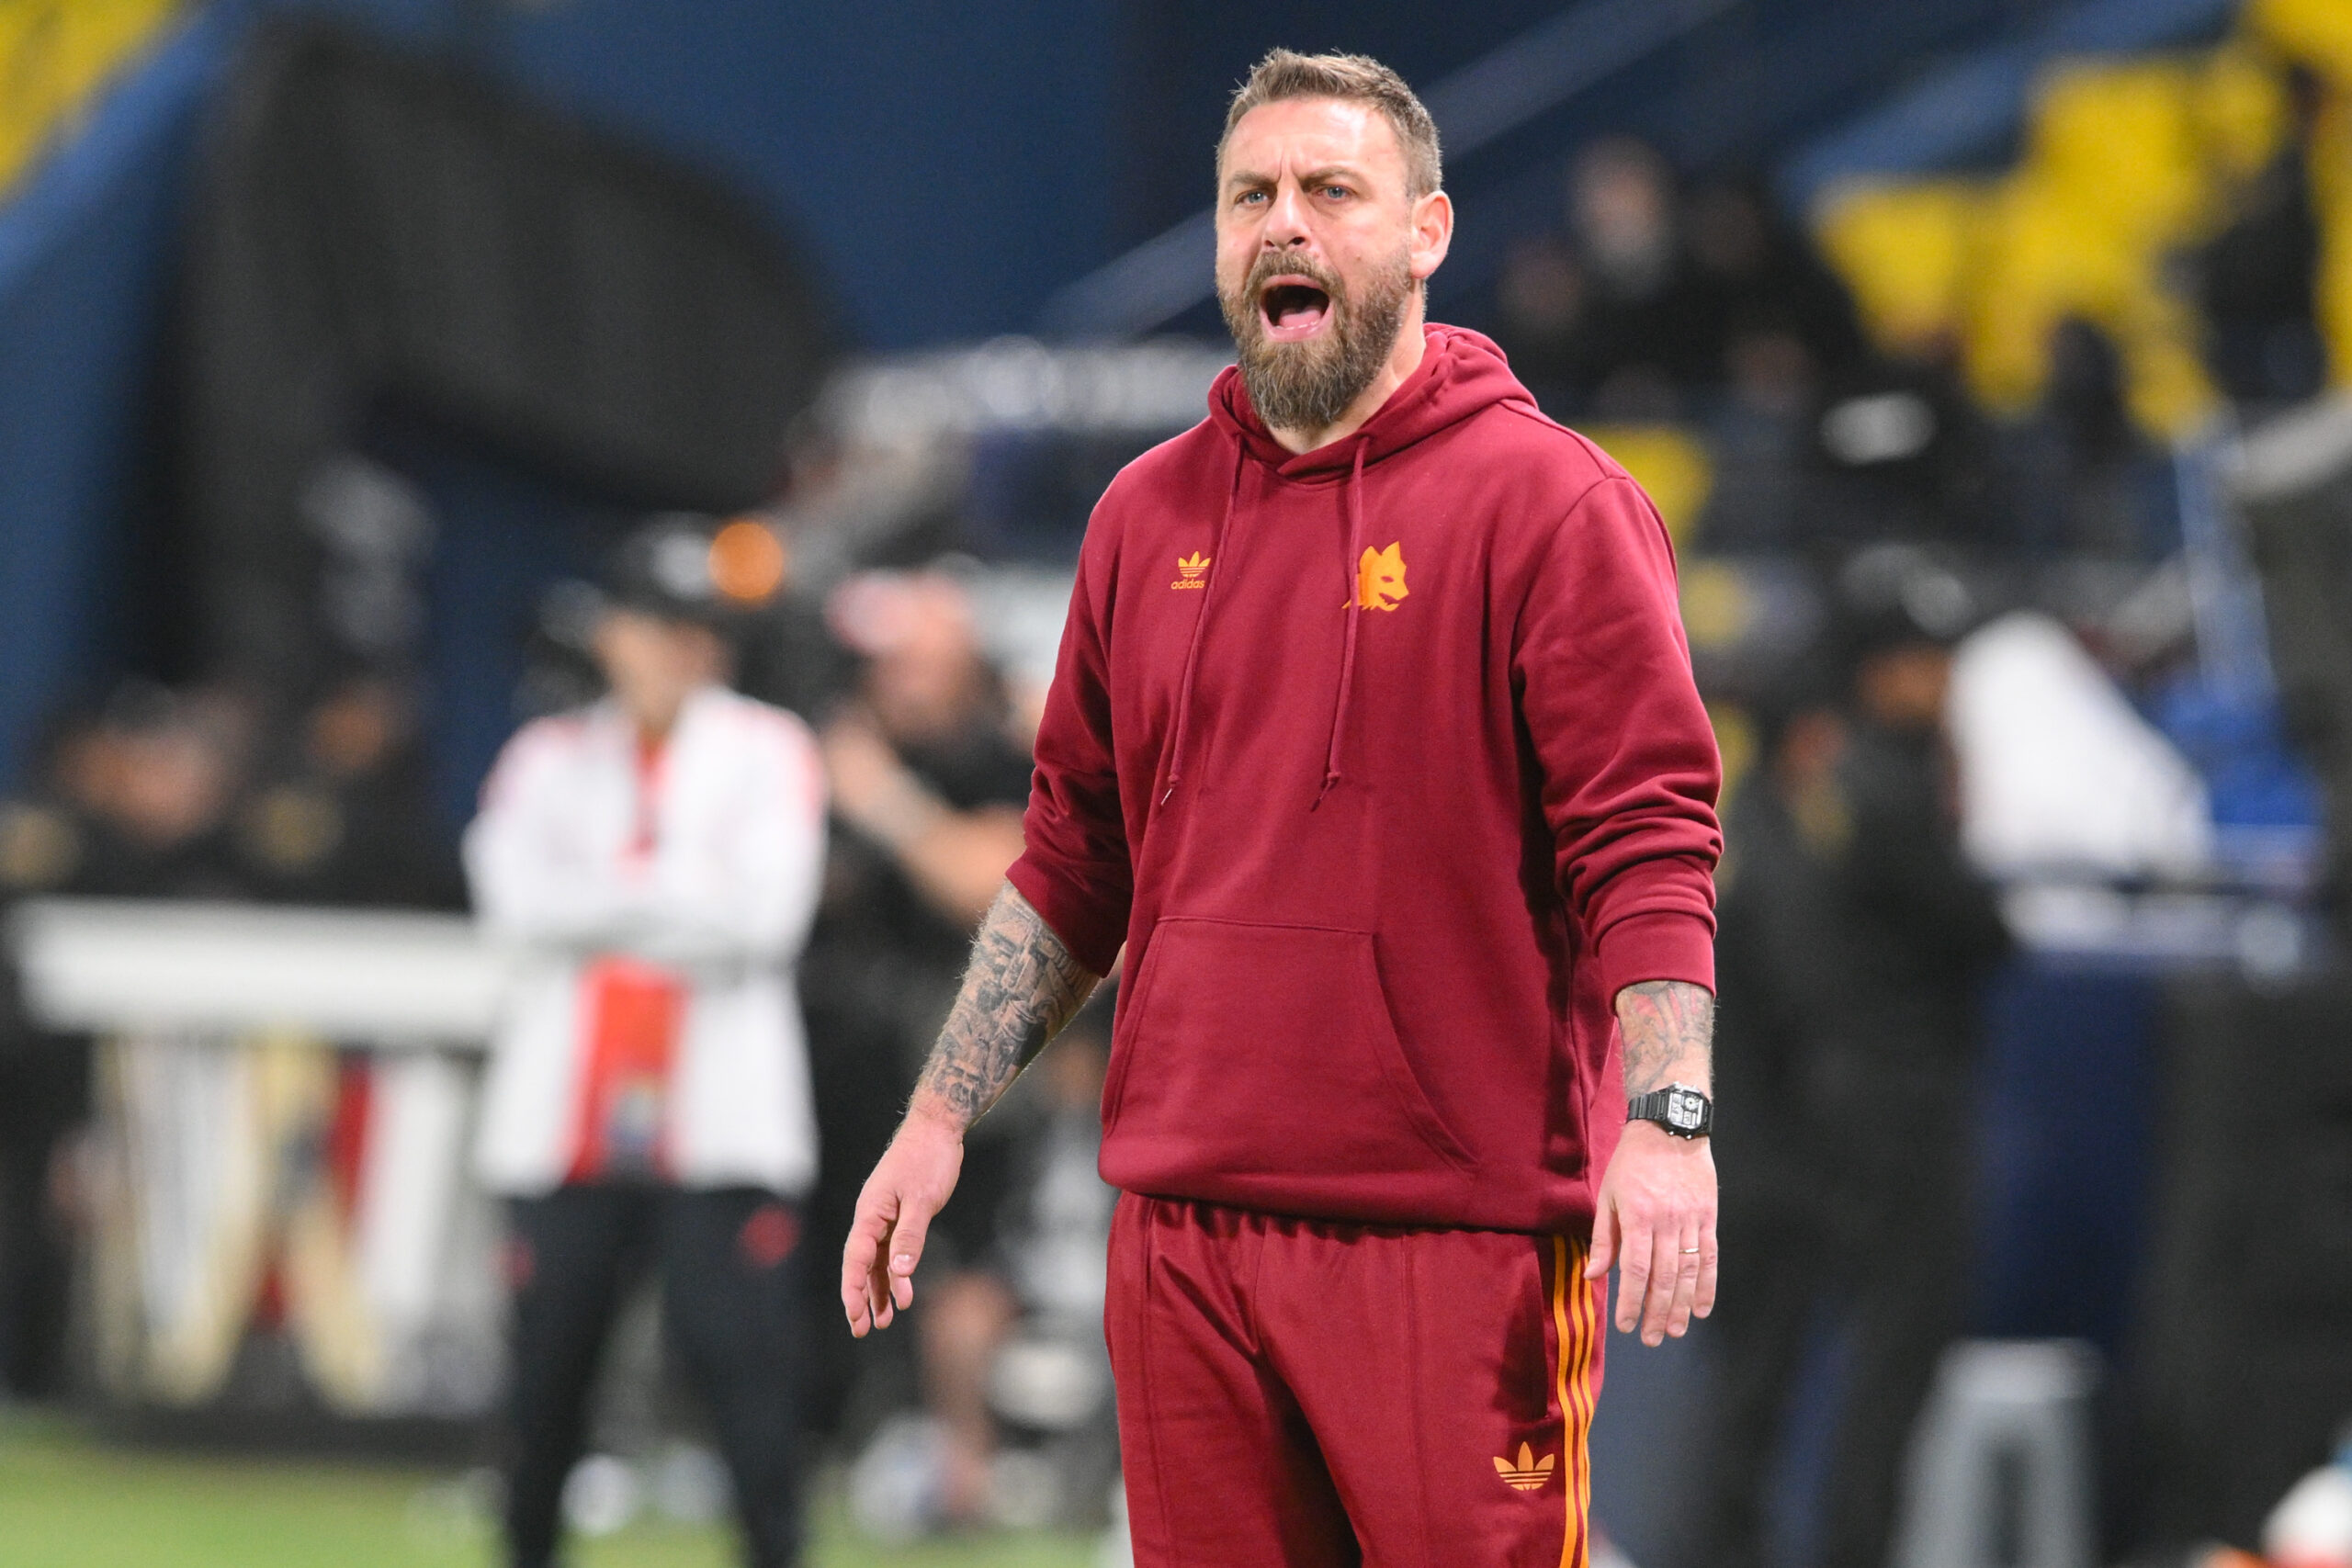 Daniele De Rossi will likely continue to coach Roma well past his original short-term contract. However, he and the club have decided together to wait.